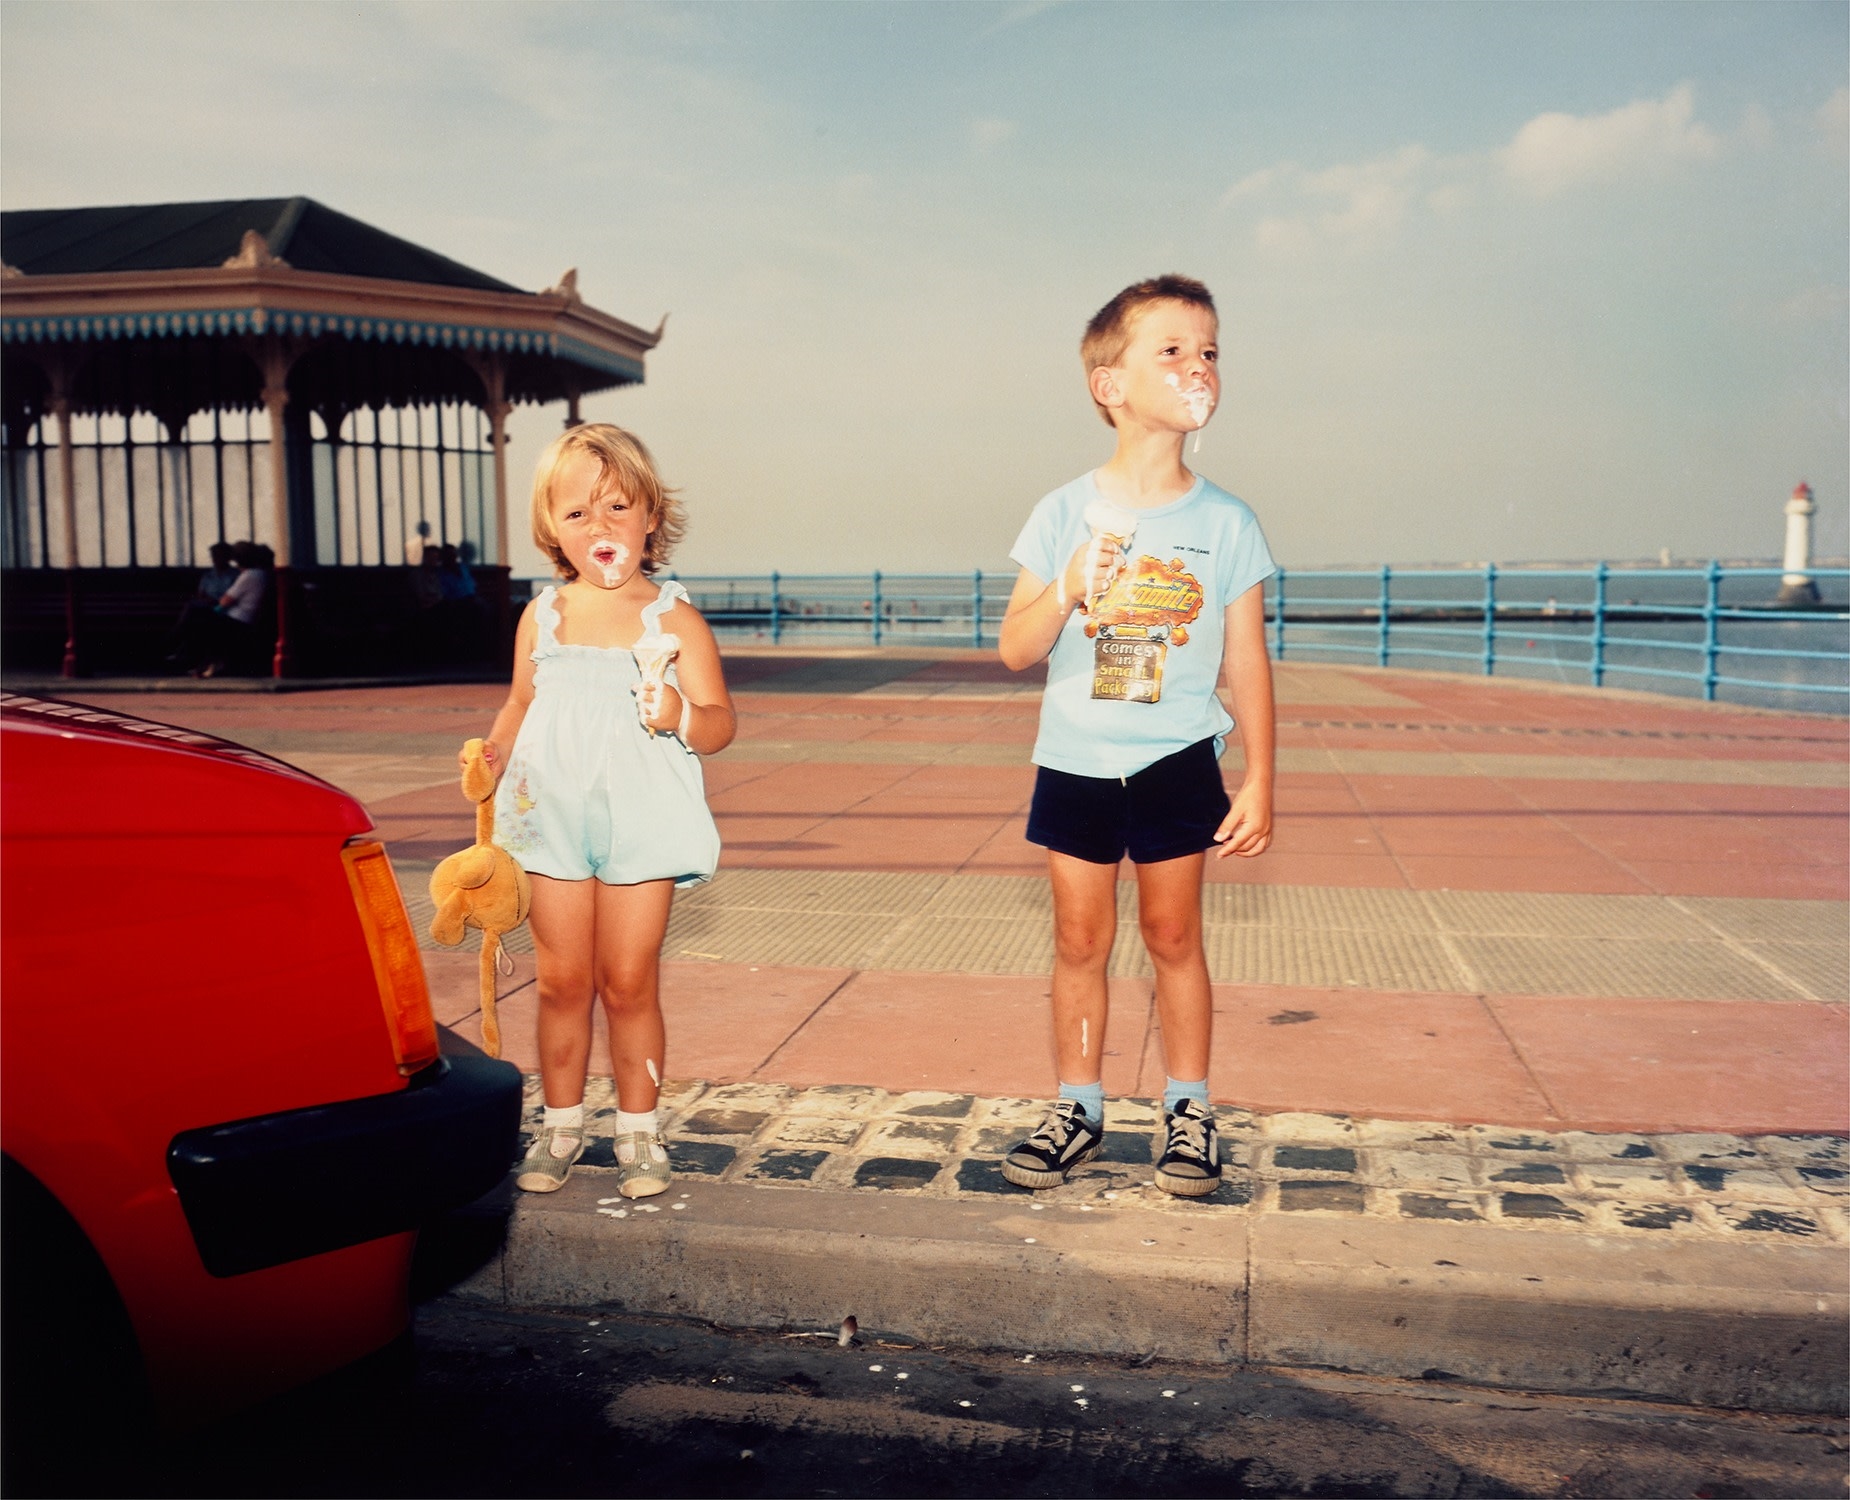 England, New Brighton from The Last Resort by Martin Parr, 1983-1985